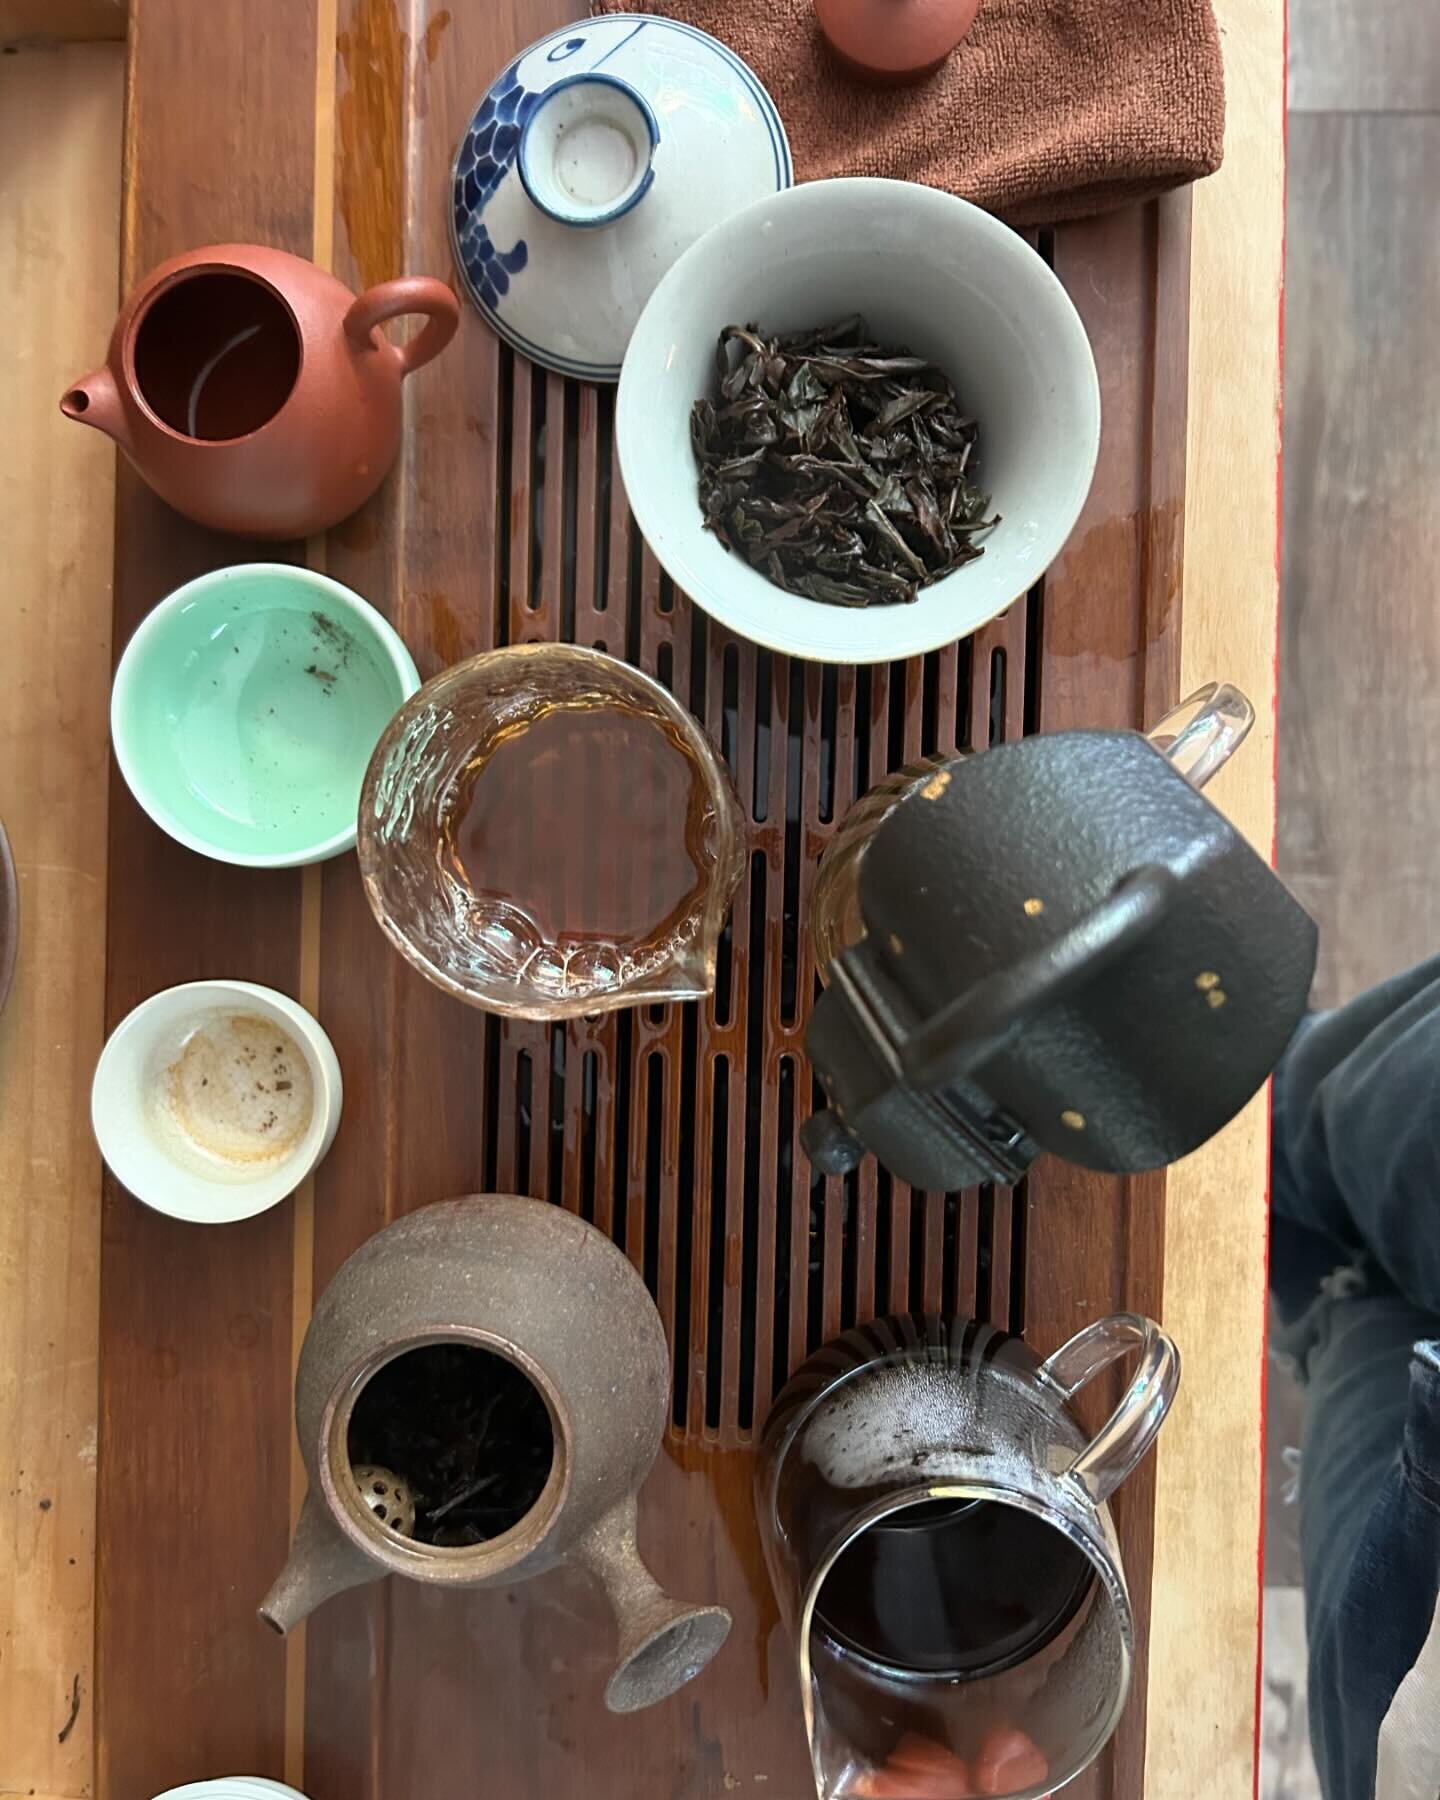 Have trouble making choices?? 
.
DONT! BUY ALL THE TEAS!!!
.
Especially these roasty (for you coffee lovers) oolongs and reds that are also BUY 2 GET 2 free!
.
@madysnoise and I were going over the varieties of teas yesterday- from raw puer, to oolon